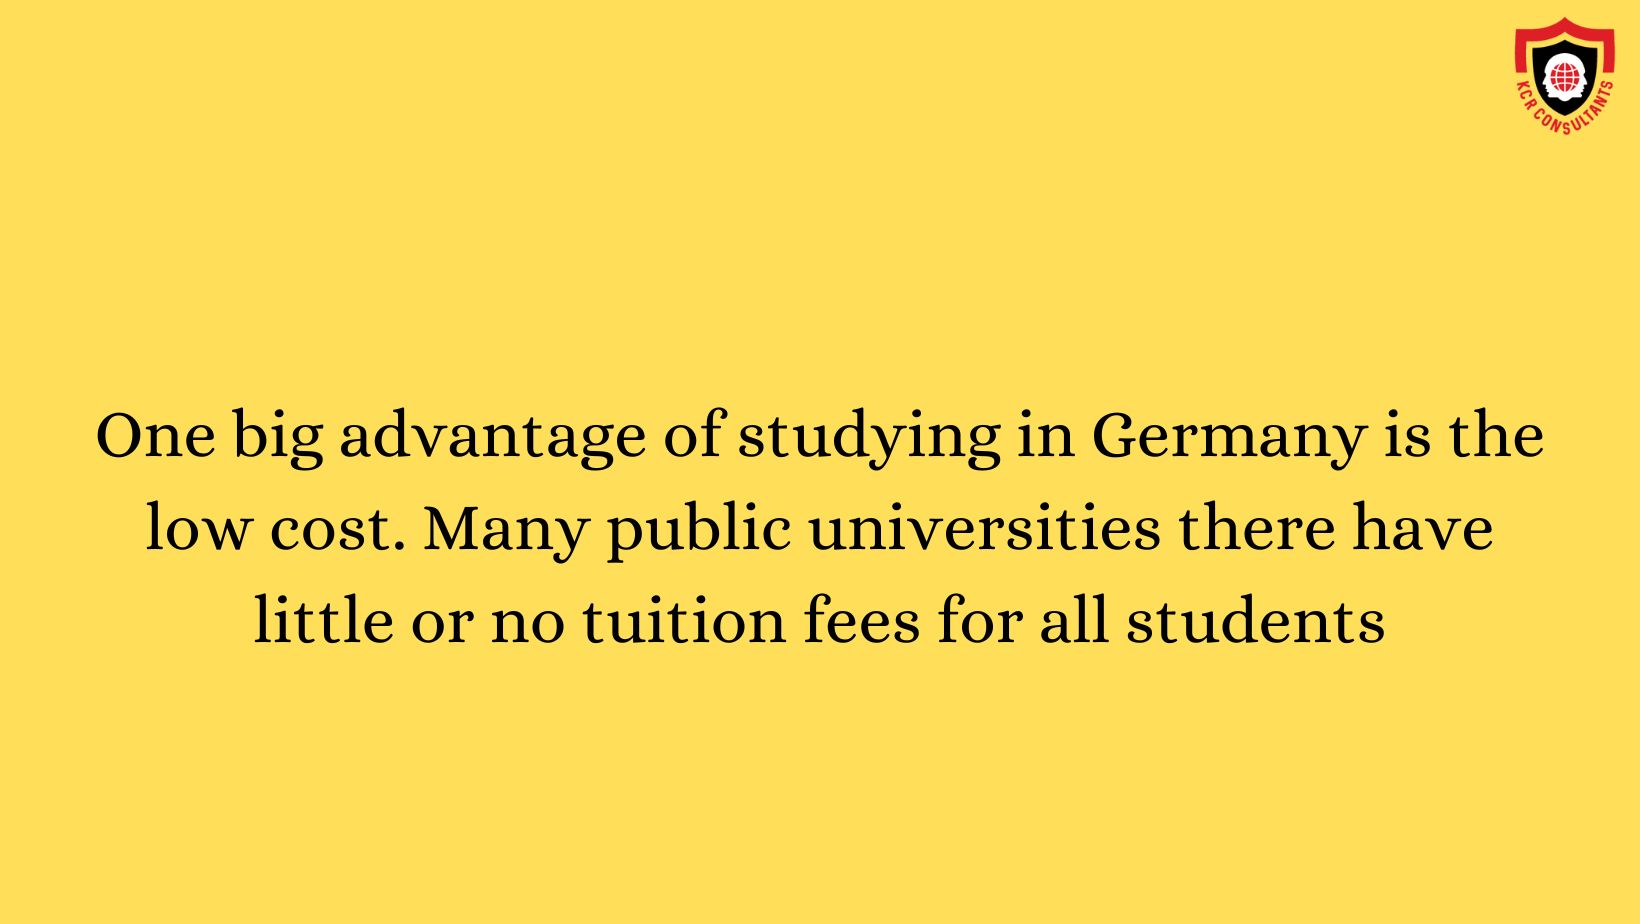 Learning in Germany - KCR CONSULTANTS - Tuition free education in Germany